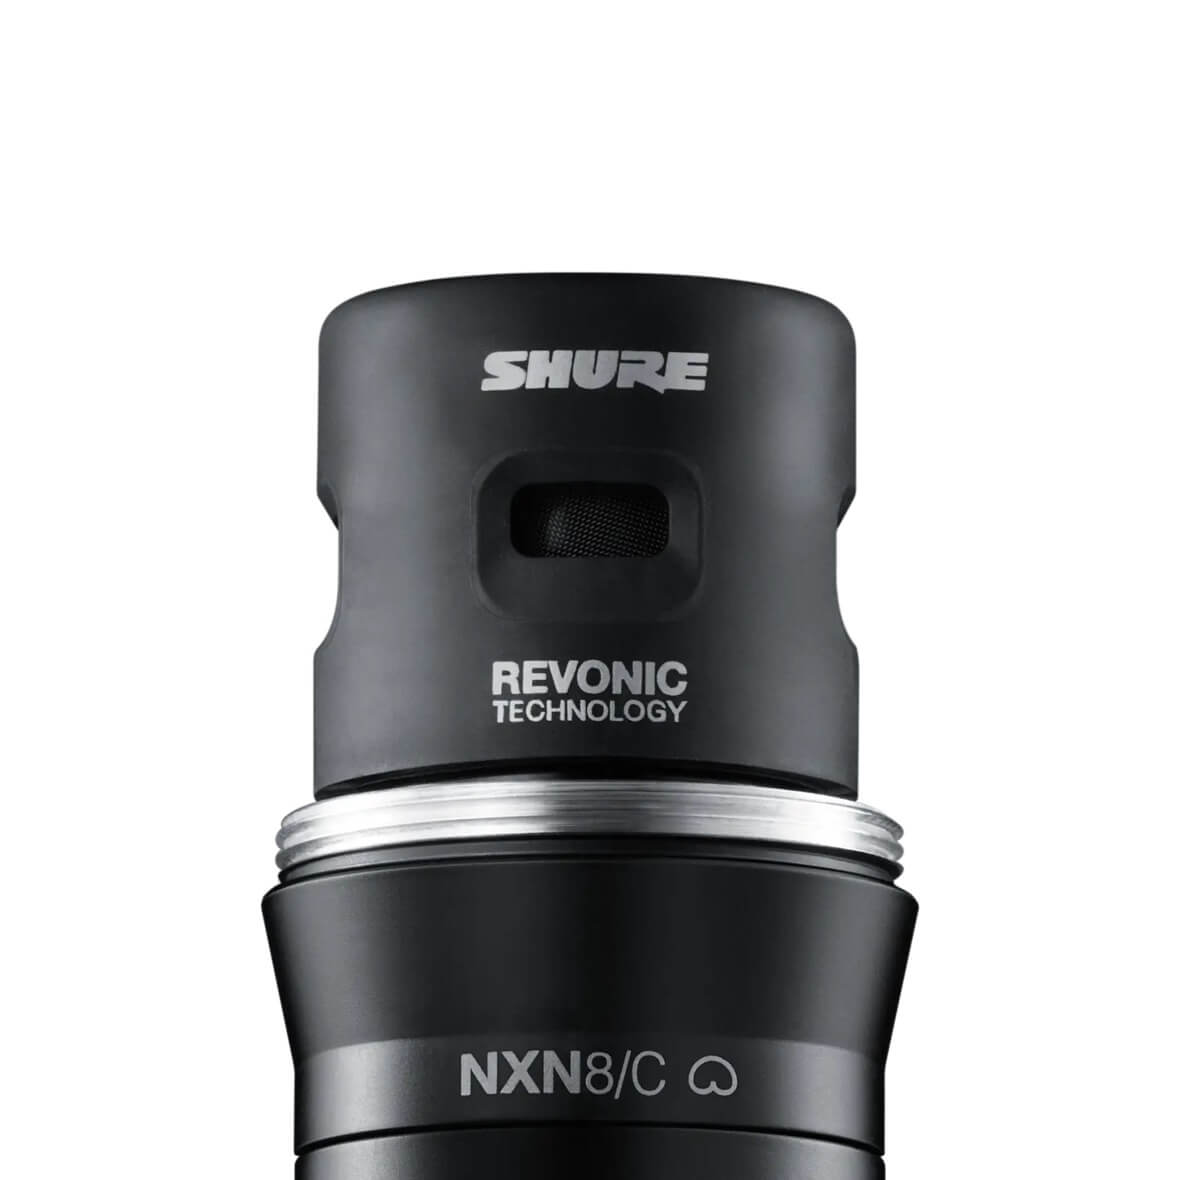 Shure Nexadyne 8/C - Cardioid Dynamic Vocal Microphone with Revonic dual-engine transducer technology